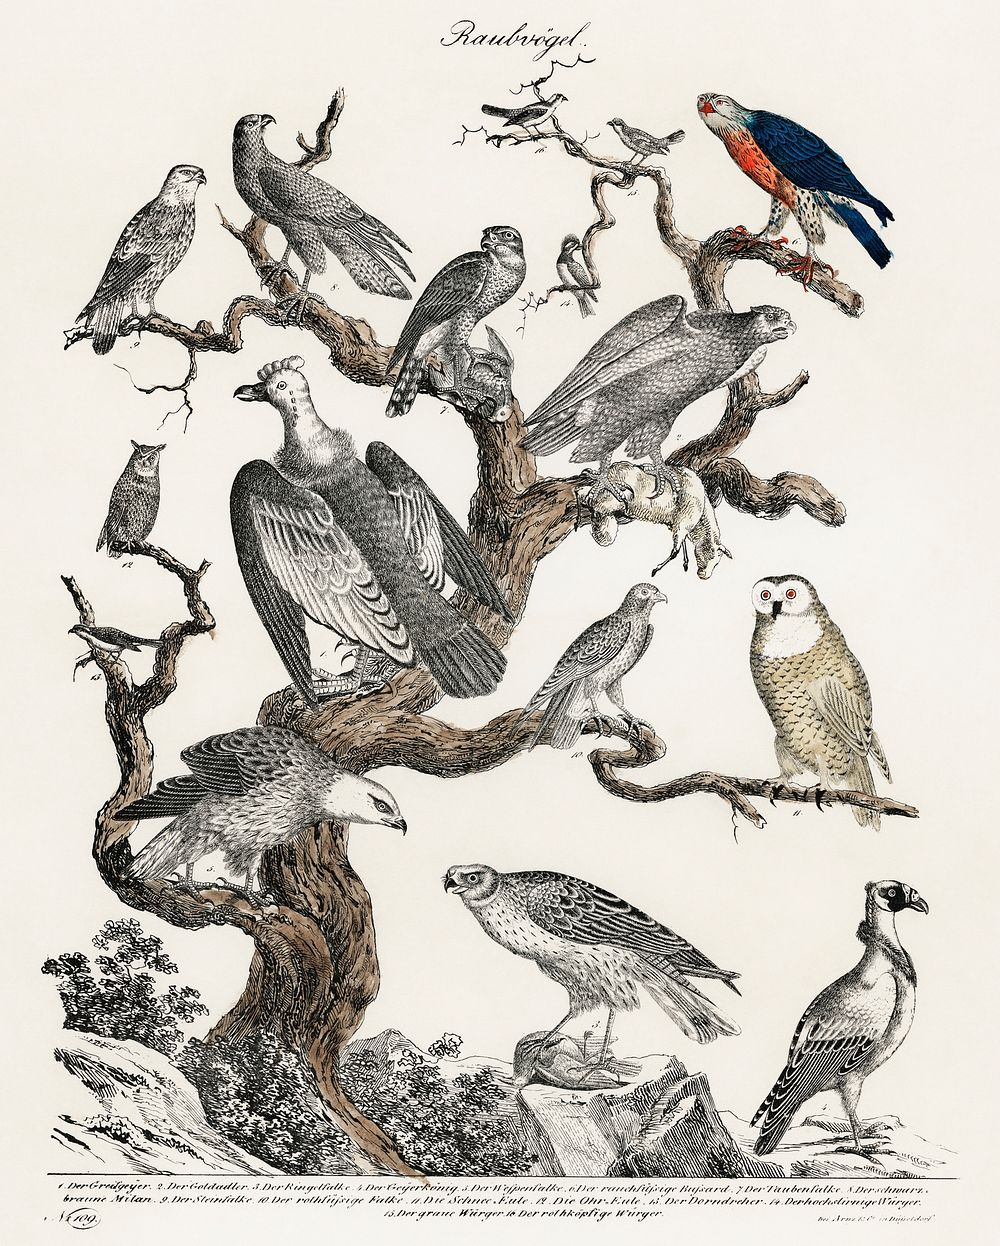 Raubvogel translated Birds of Prey (ca.1840), a lithograph of various birds of prey perched on a tree. Digitally enhanced…